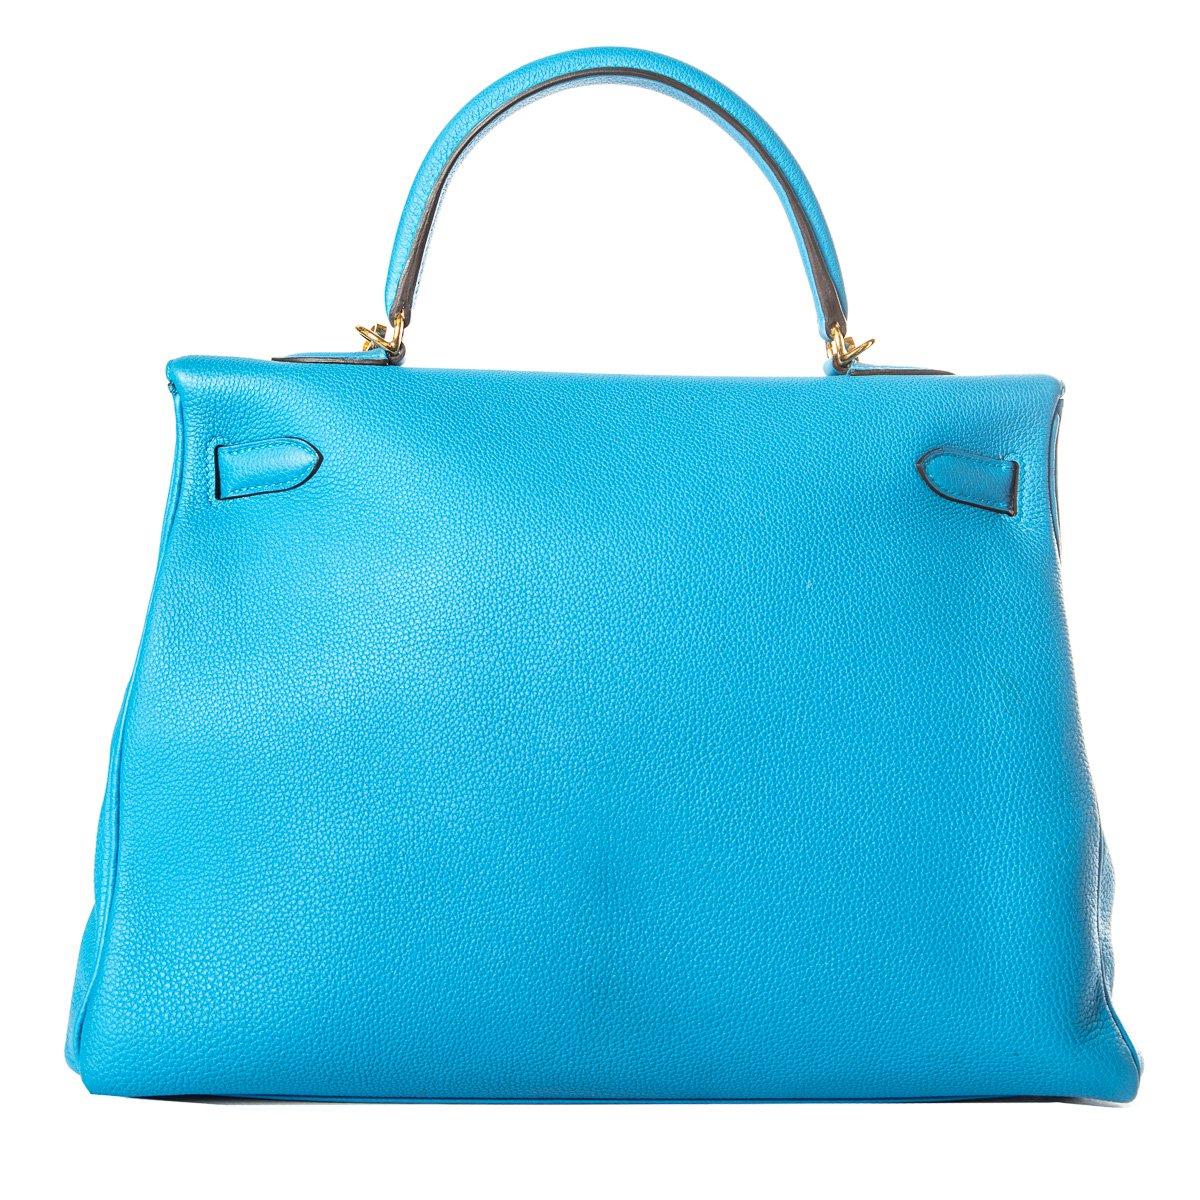 Hermes 35 cm Blue Izmir Kelly Bag Clemence leather In Excellent Condition For Sale In Scottsdale, AZ